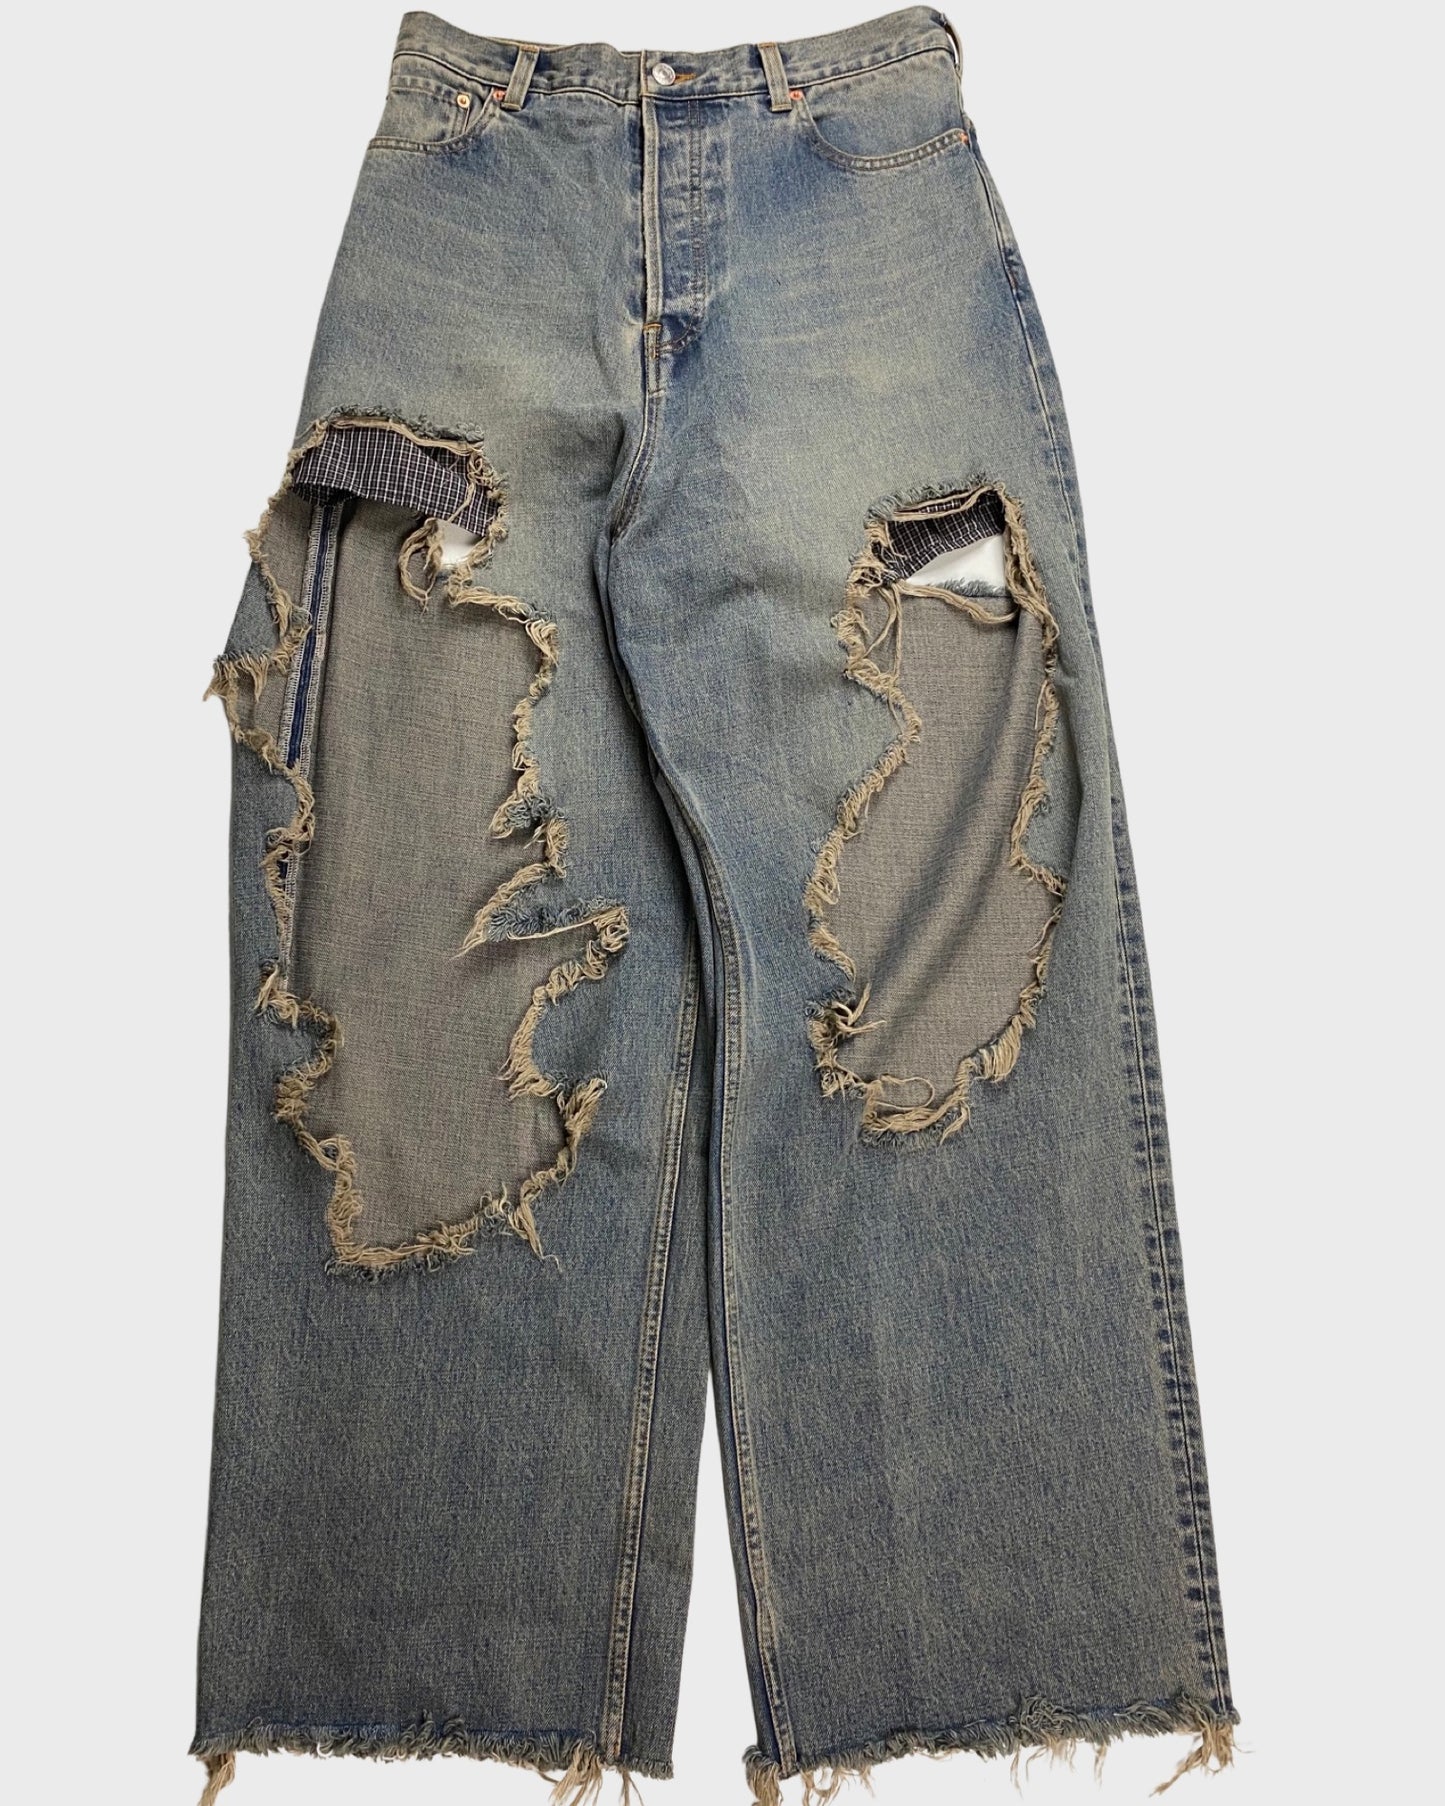 Balenciaga AW21 destroyed shredded torn boxers Jeans in blue SZ:S|M